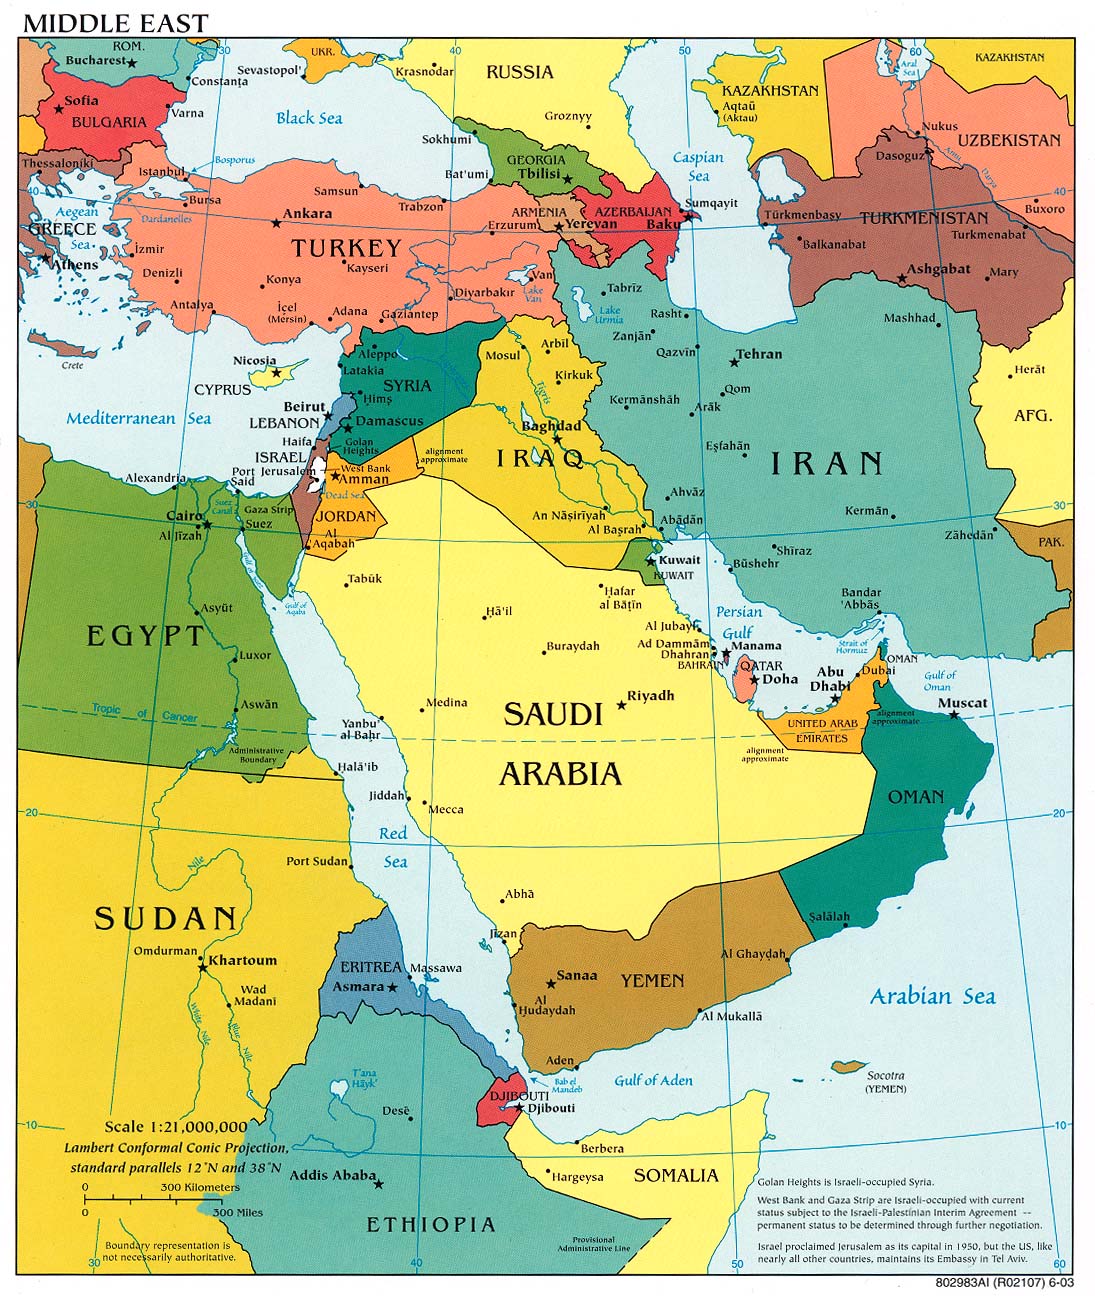 Map of the Middle East includes Israel, Syria, Jordan, Lebanon, Iraq, Iran, Egypt